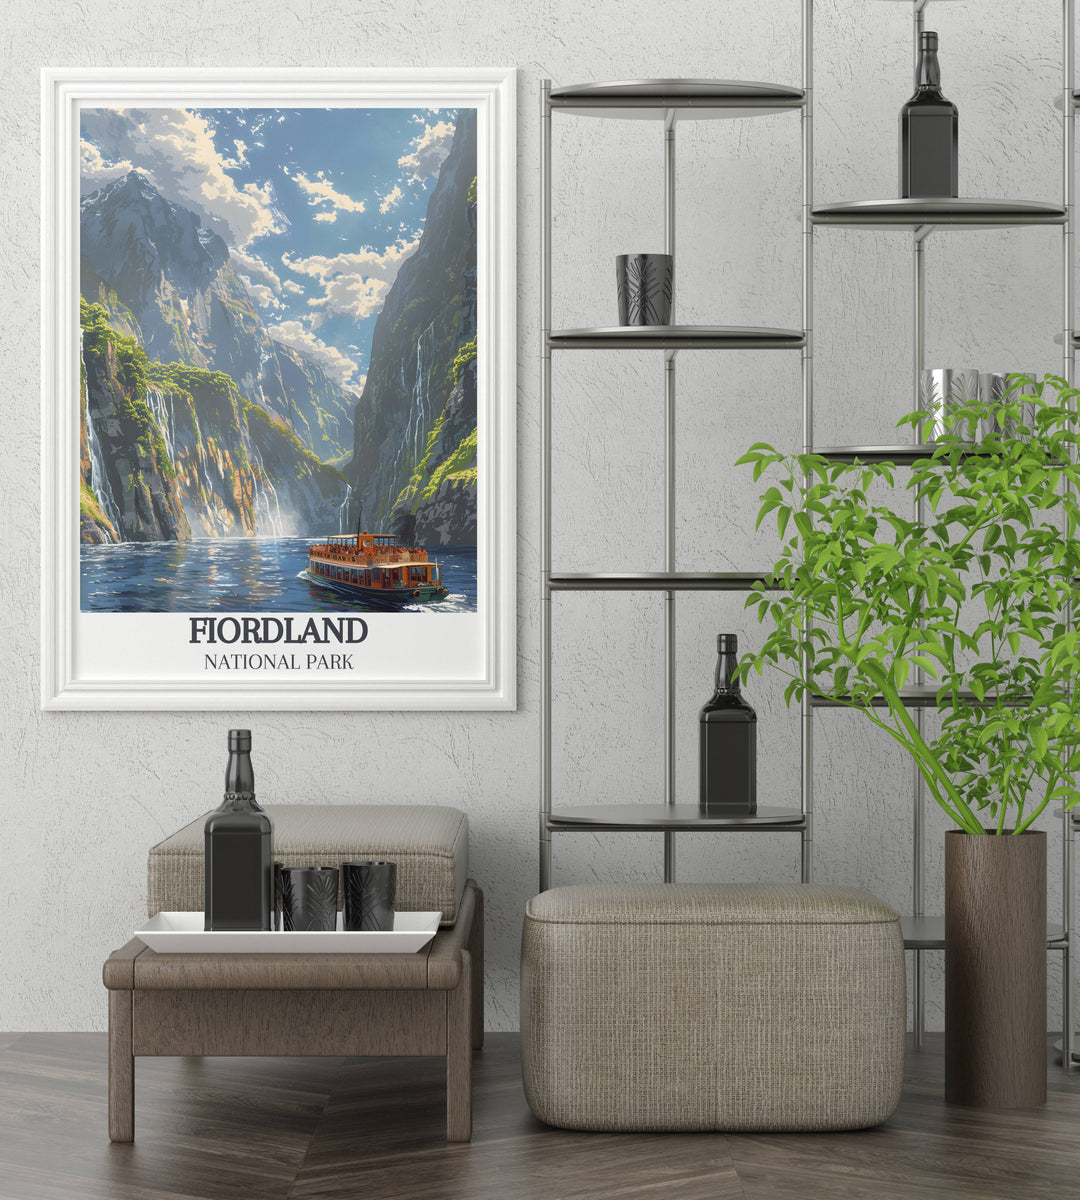 A panoramic view of Milford Sound from the air, highlighting the extensive fjords and dense forests in a breathtaking travel poster.